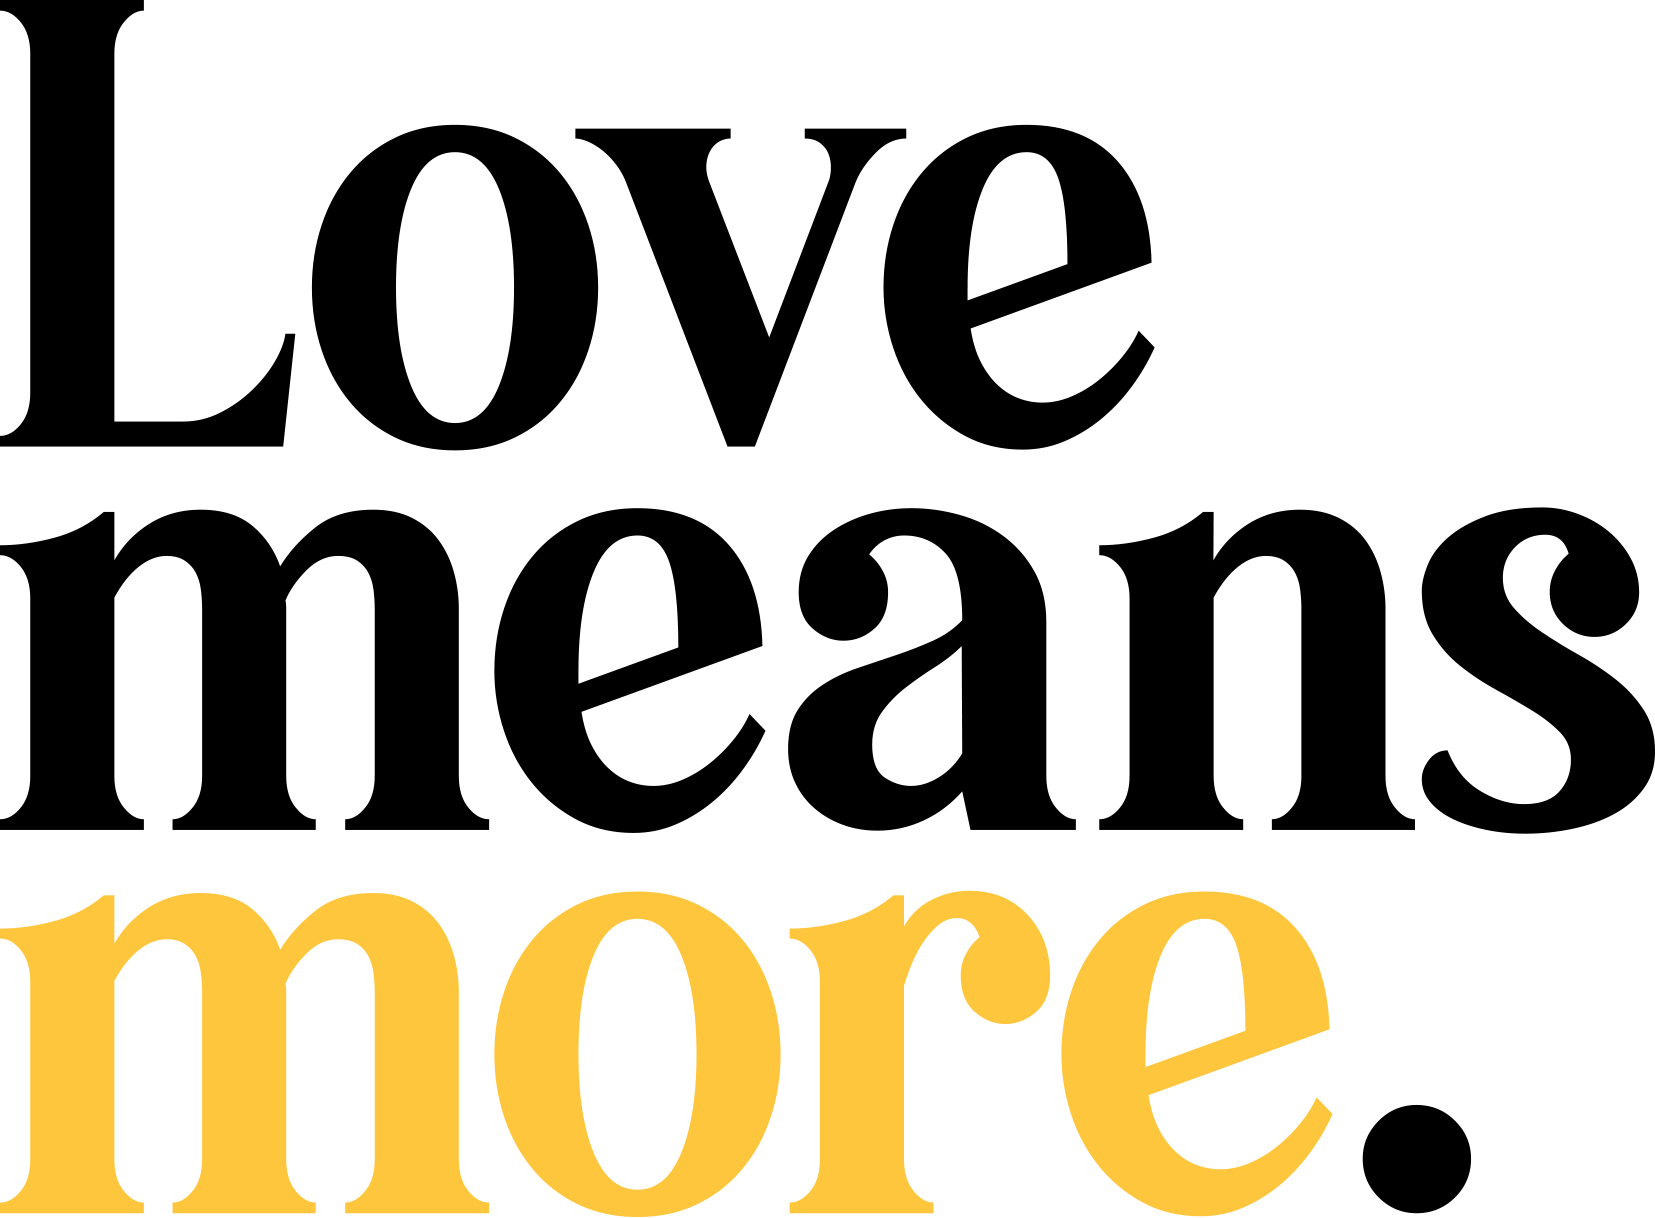 Love means more.